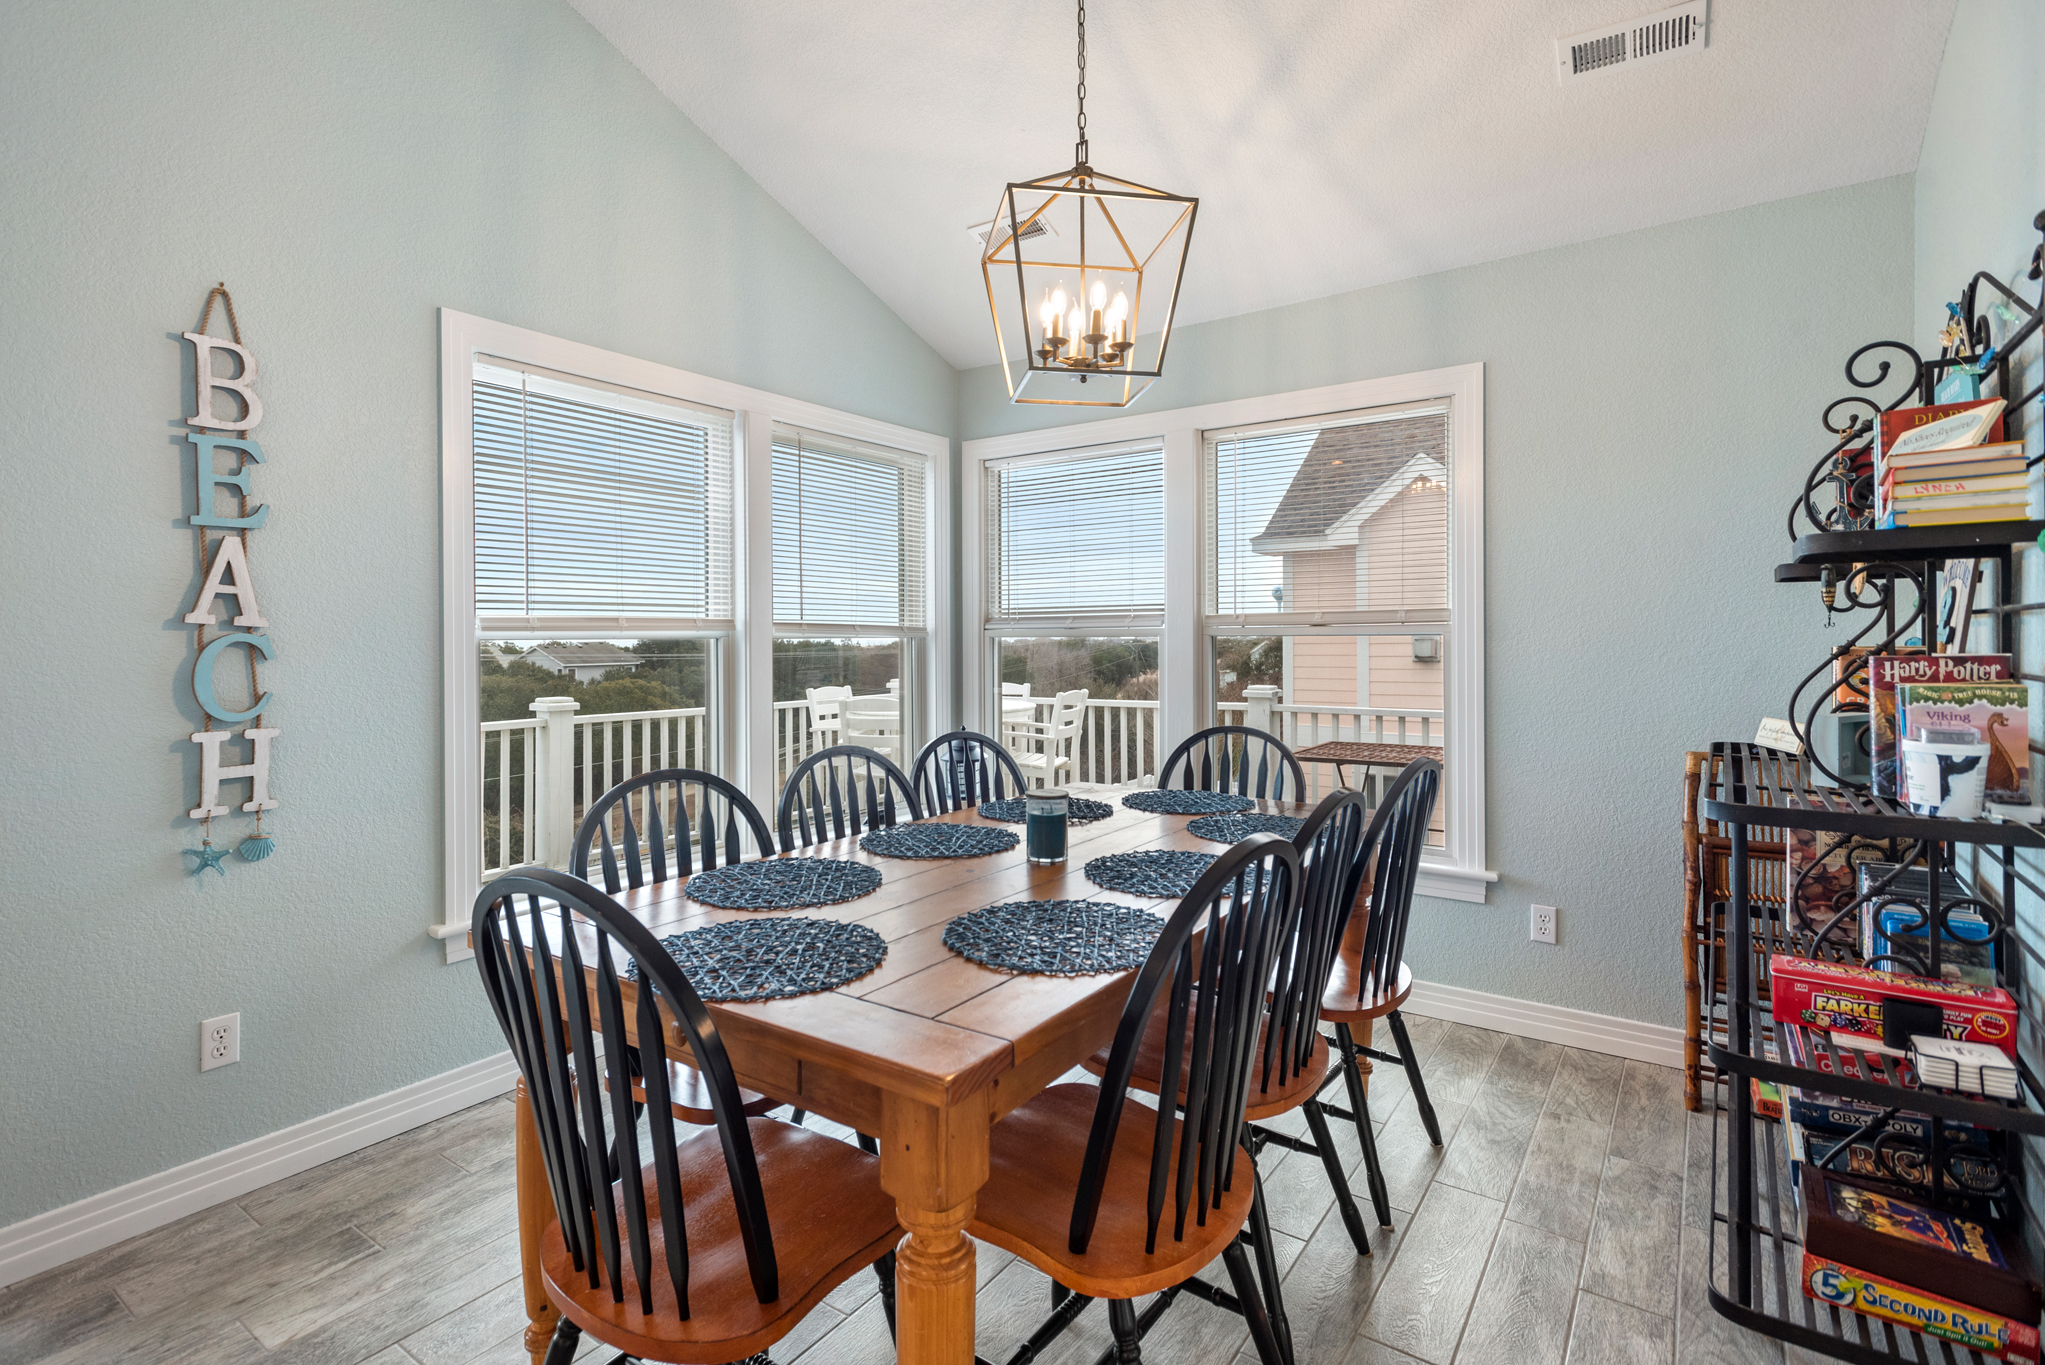 HK29: Beachin' Up With The Jones's | Top Level Dining Area